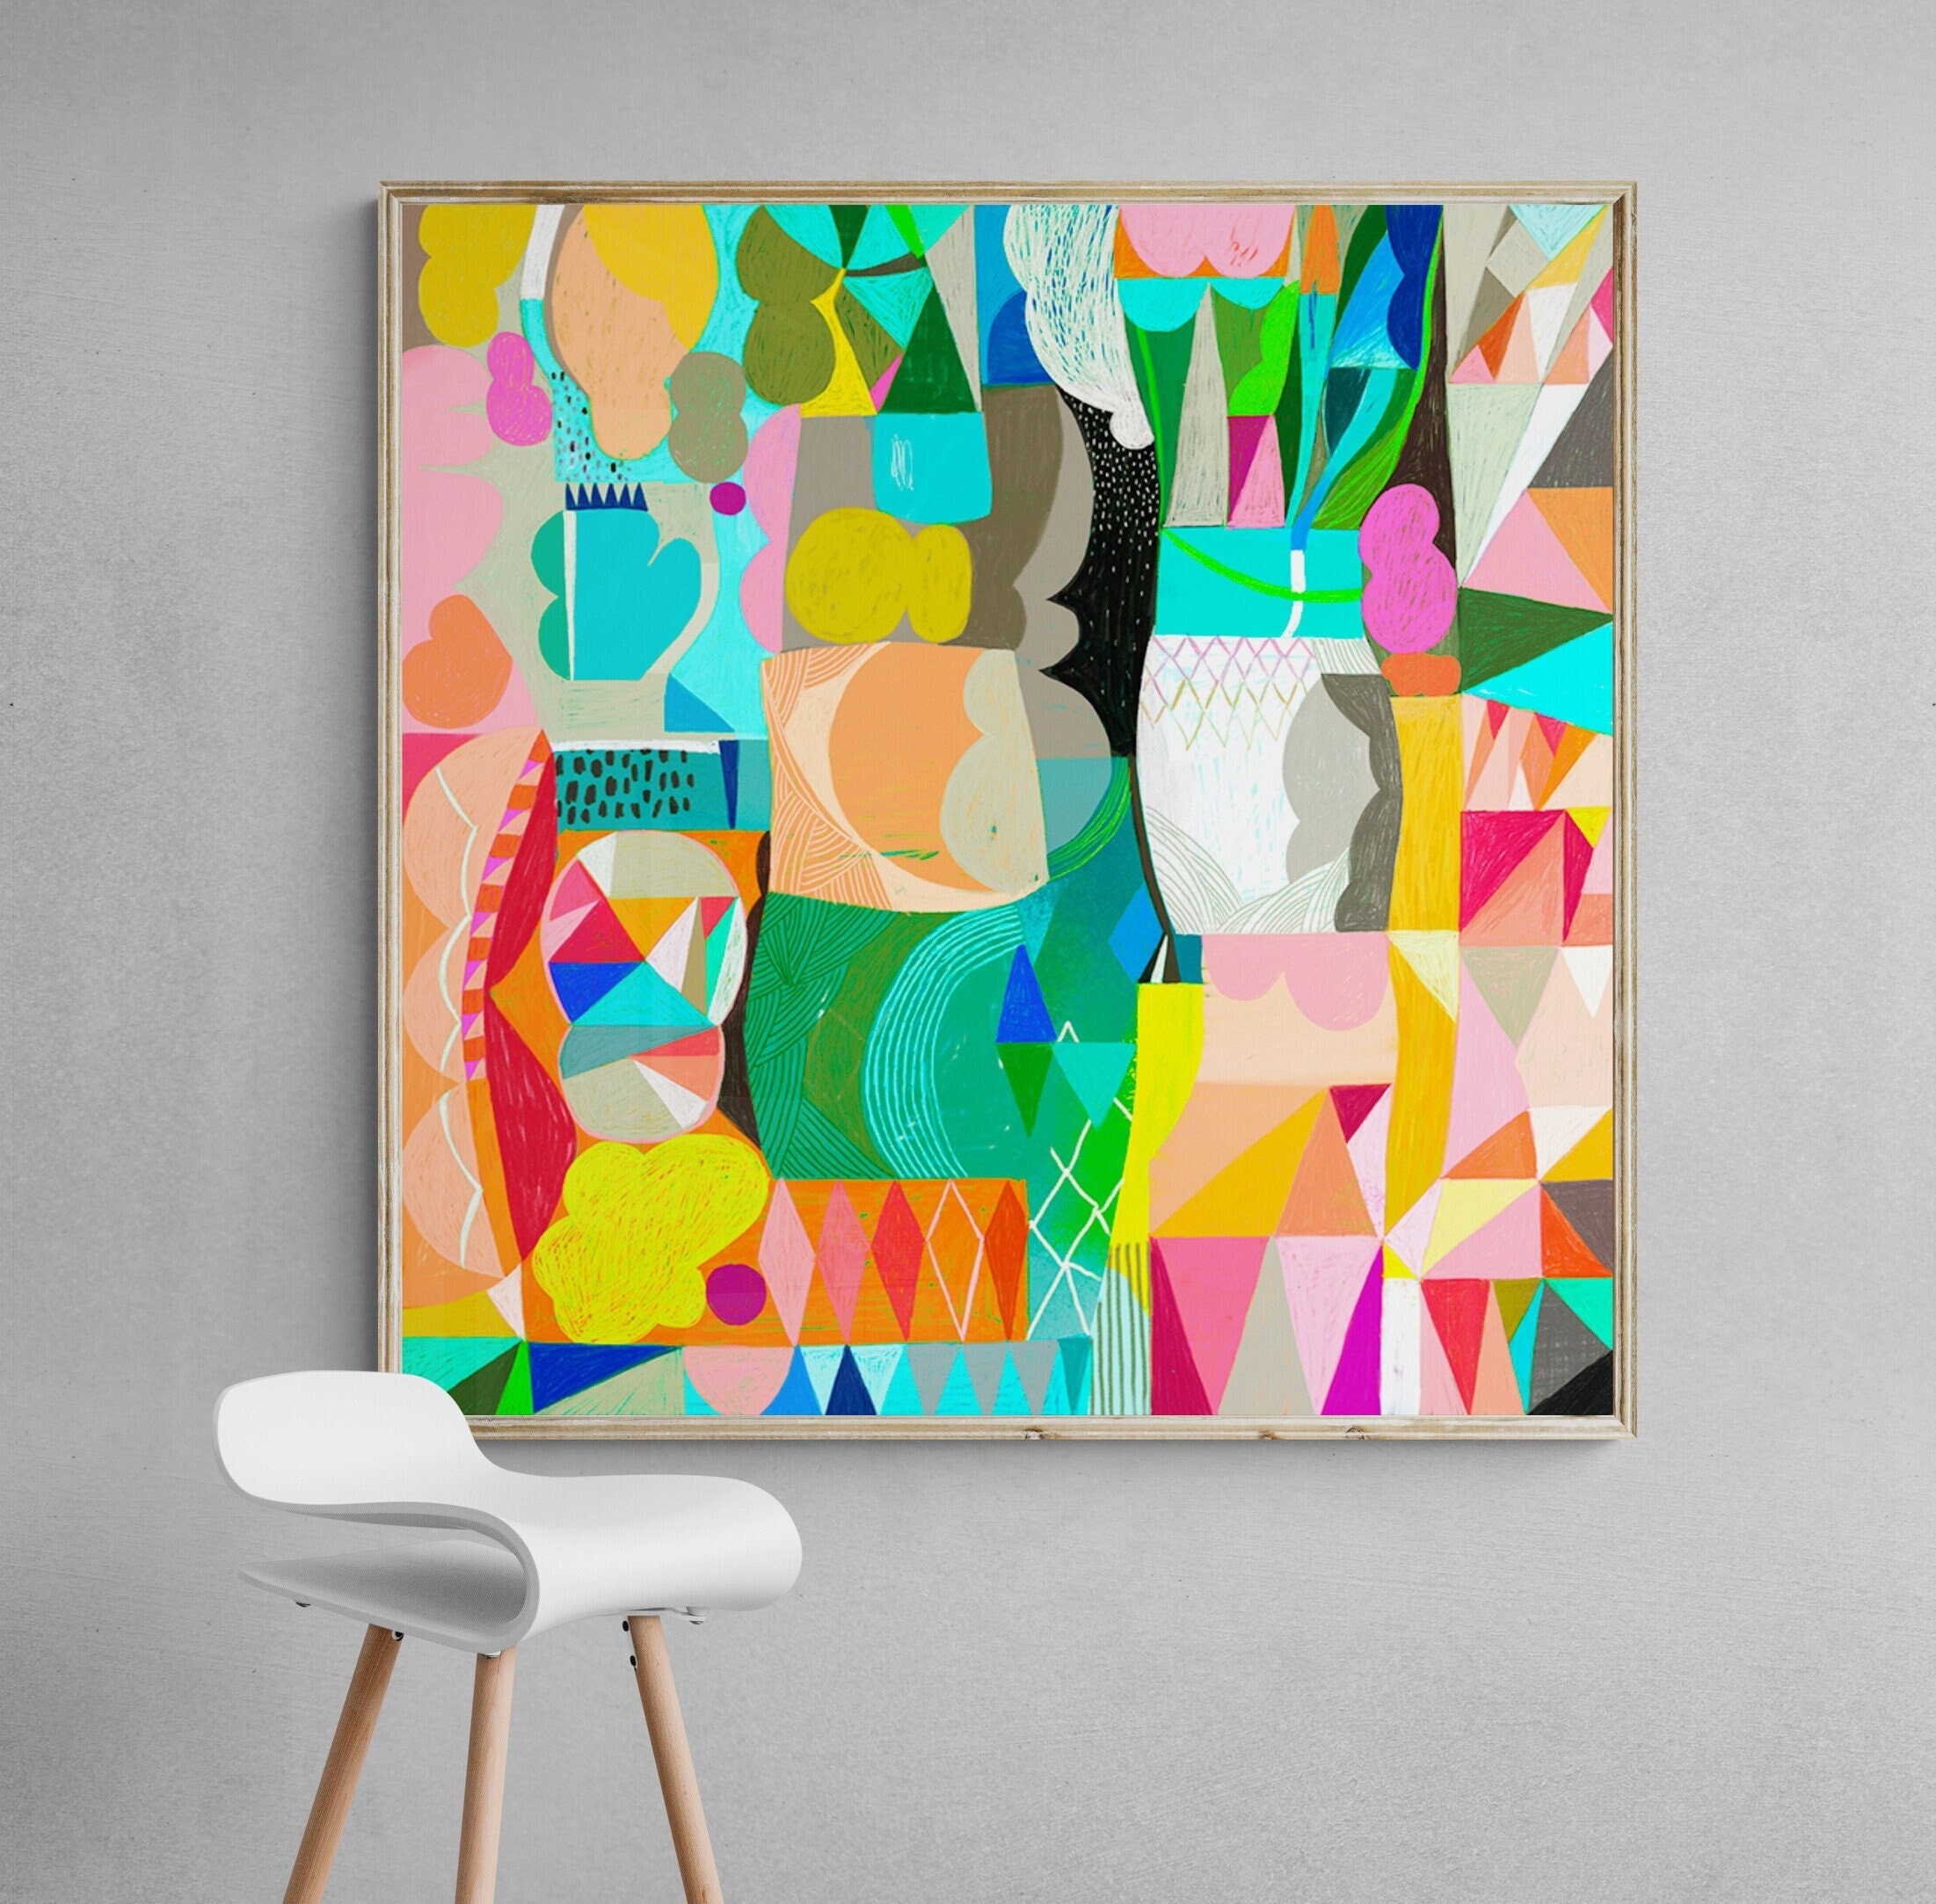 Geometric Abstract Painting on Canvas Colorful Wall Art Original Contemporary Square Artwork 24x24